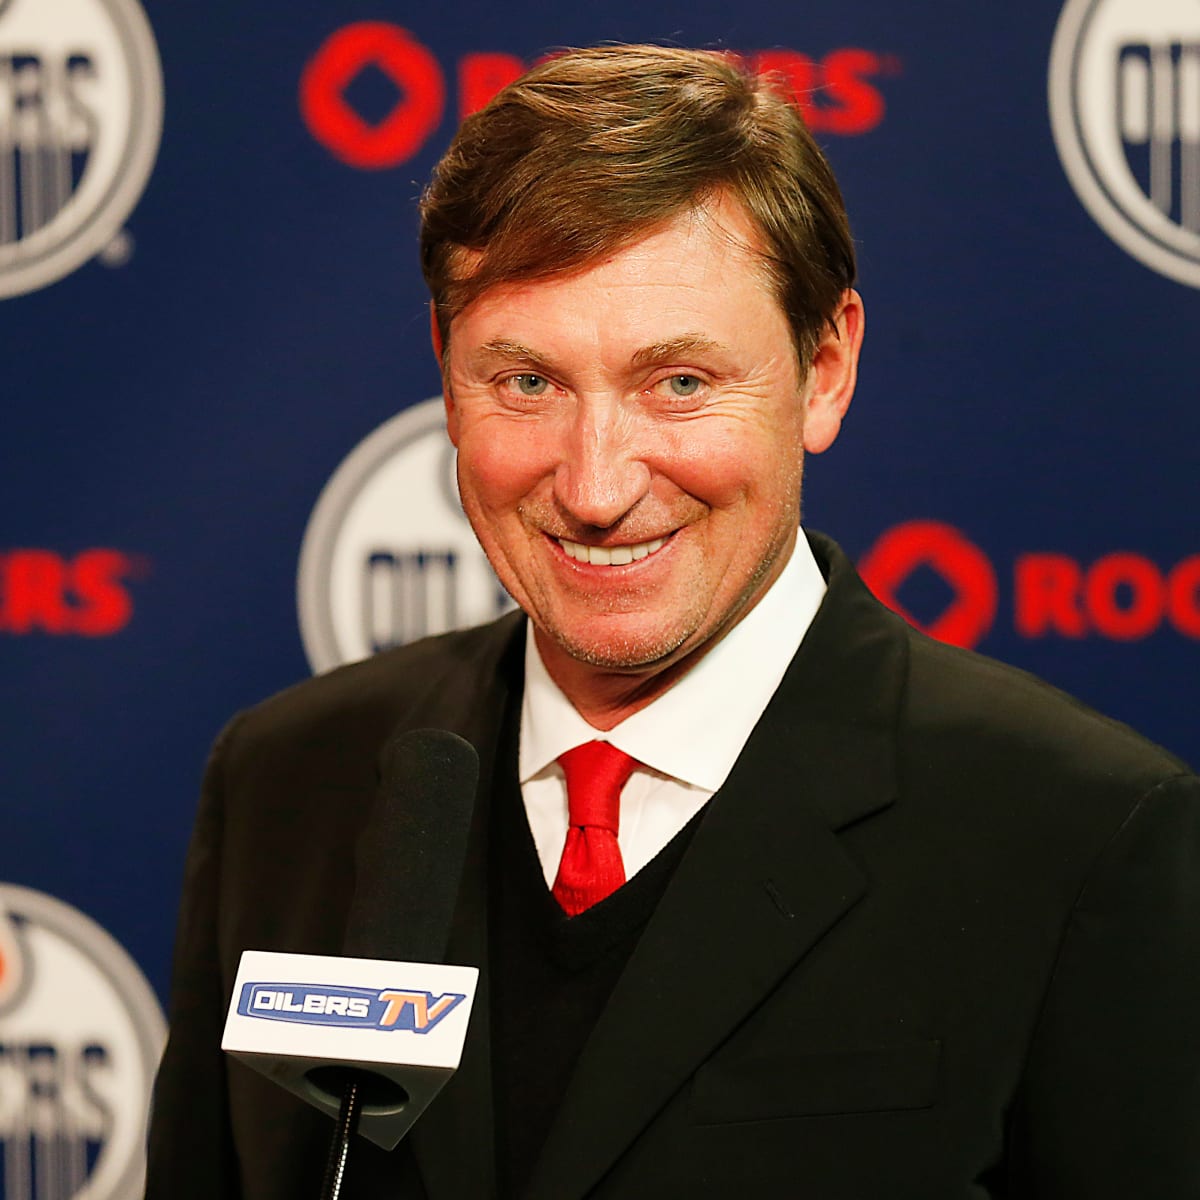 Champagne-stained Gretzky jersey sells for a record-high at